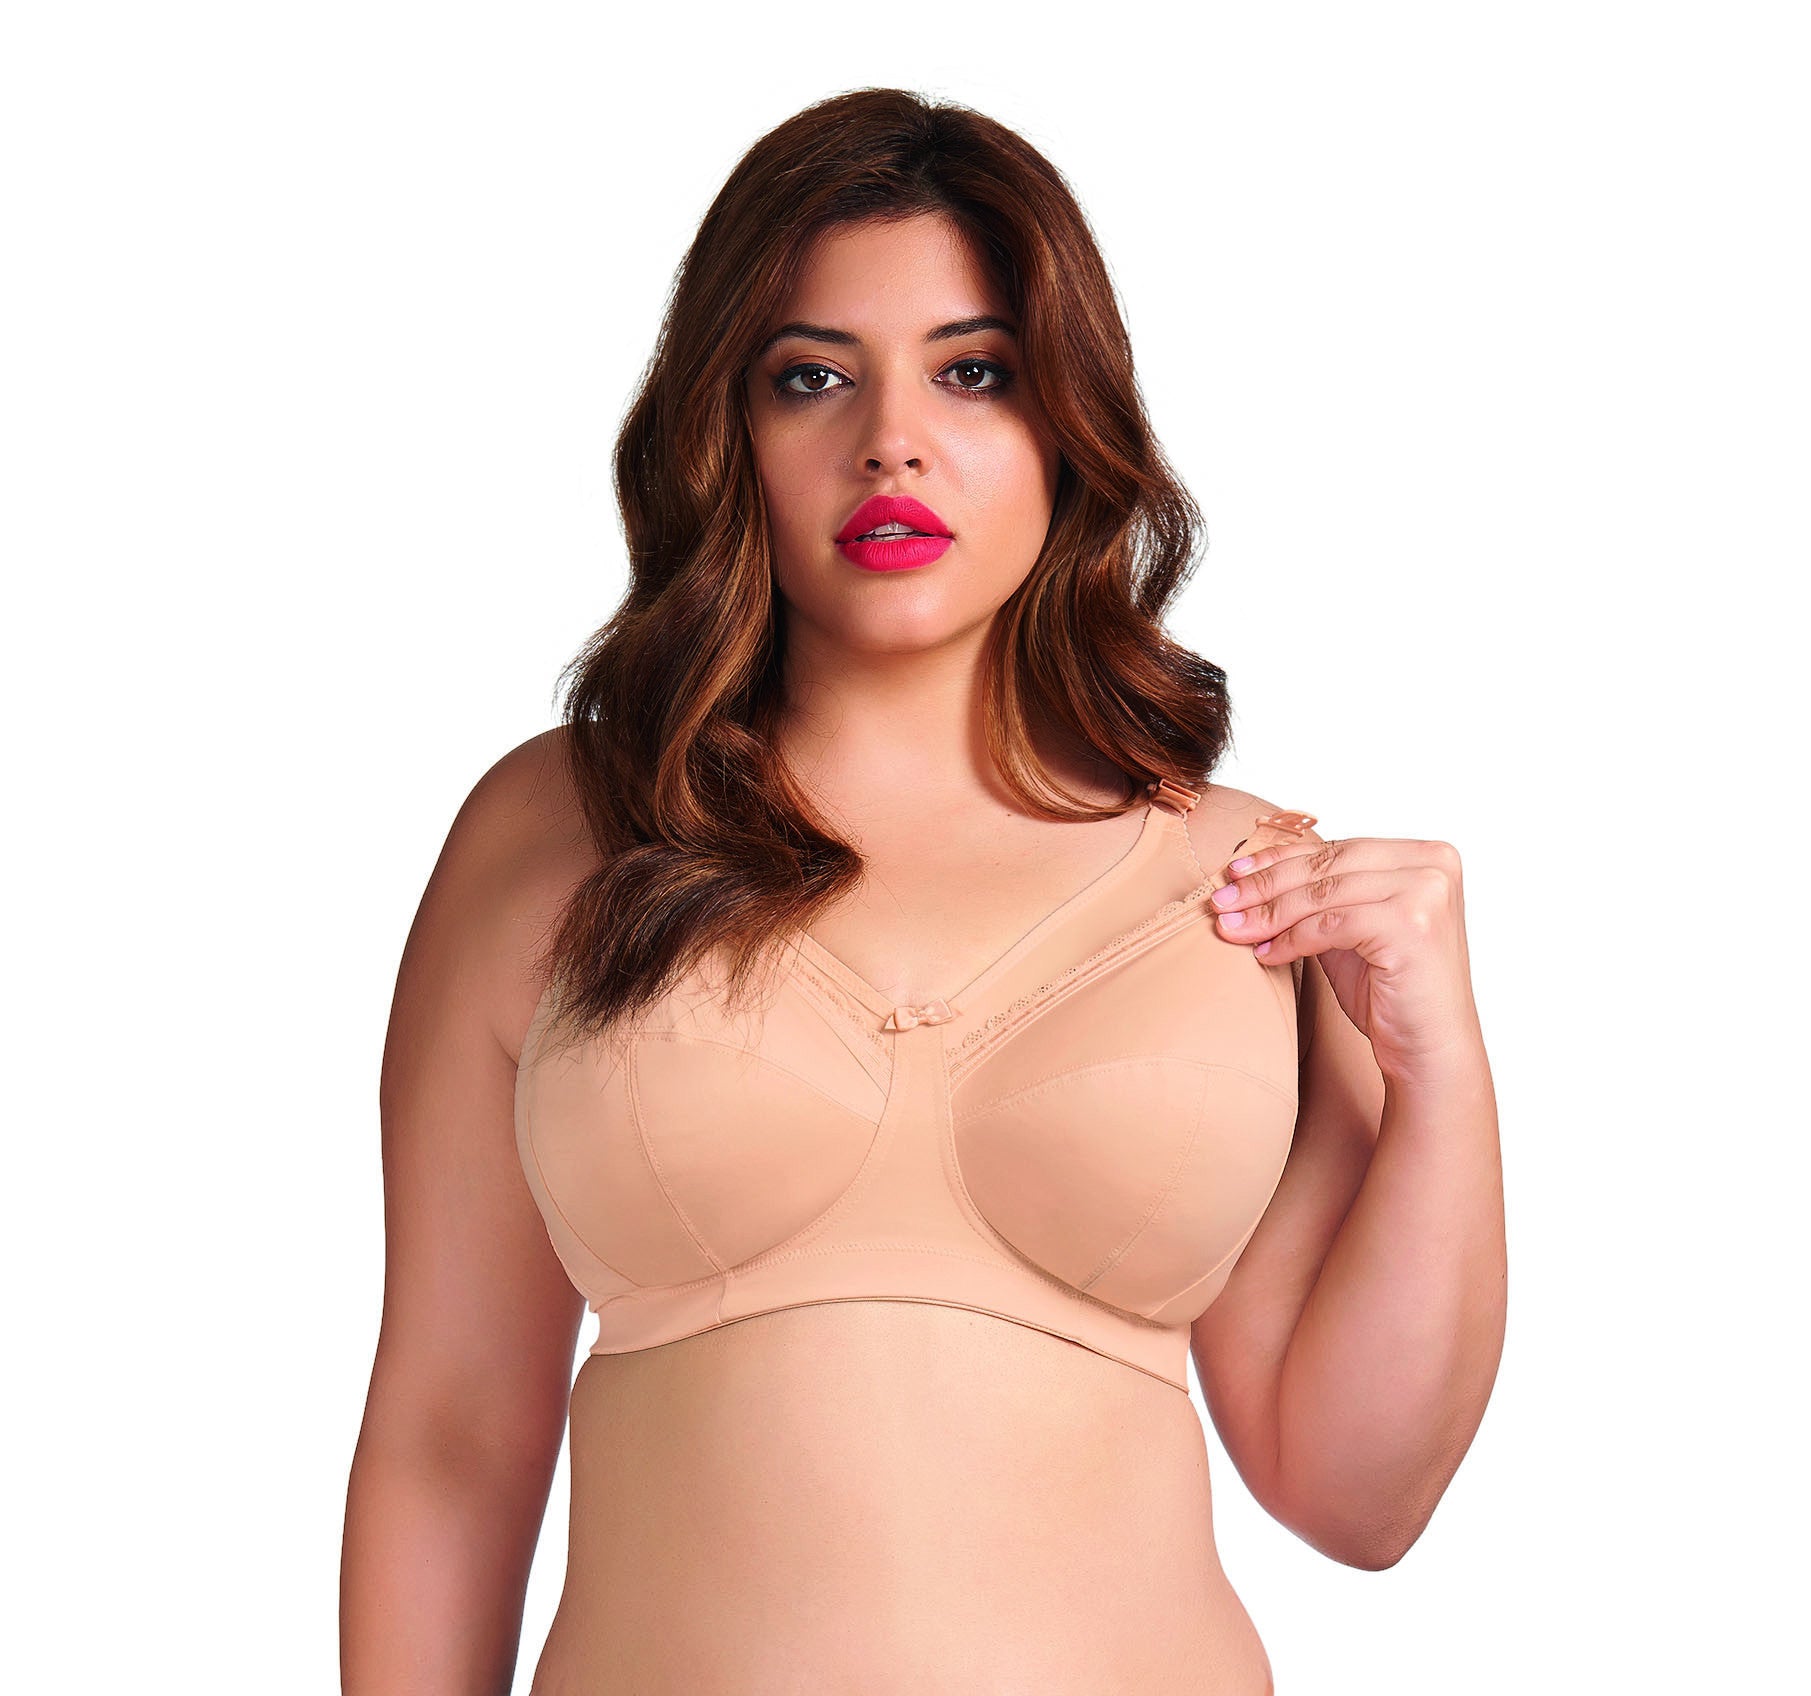 Elomi Smoothing Underwire Molded Nursing Bra - In the Mood